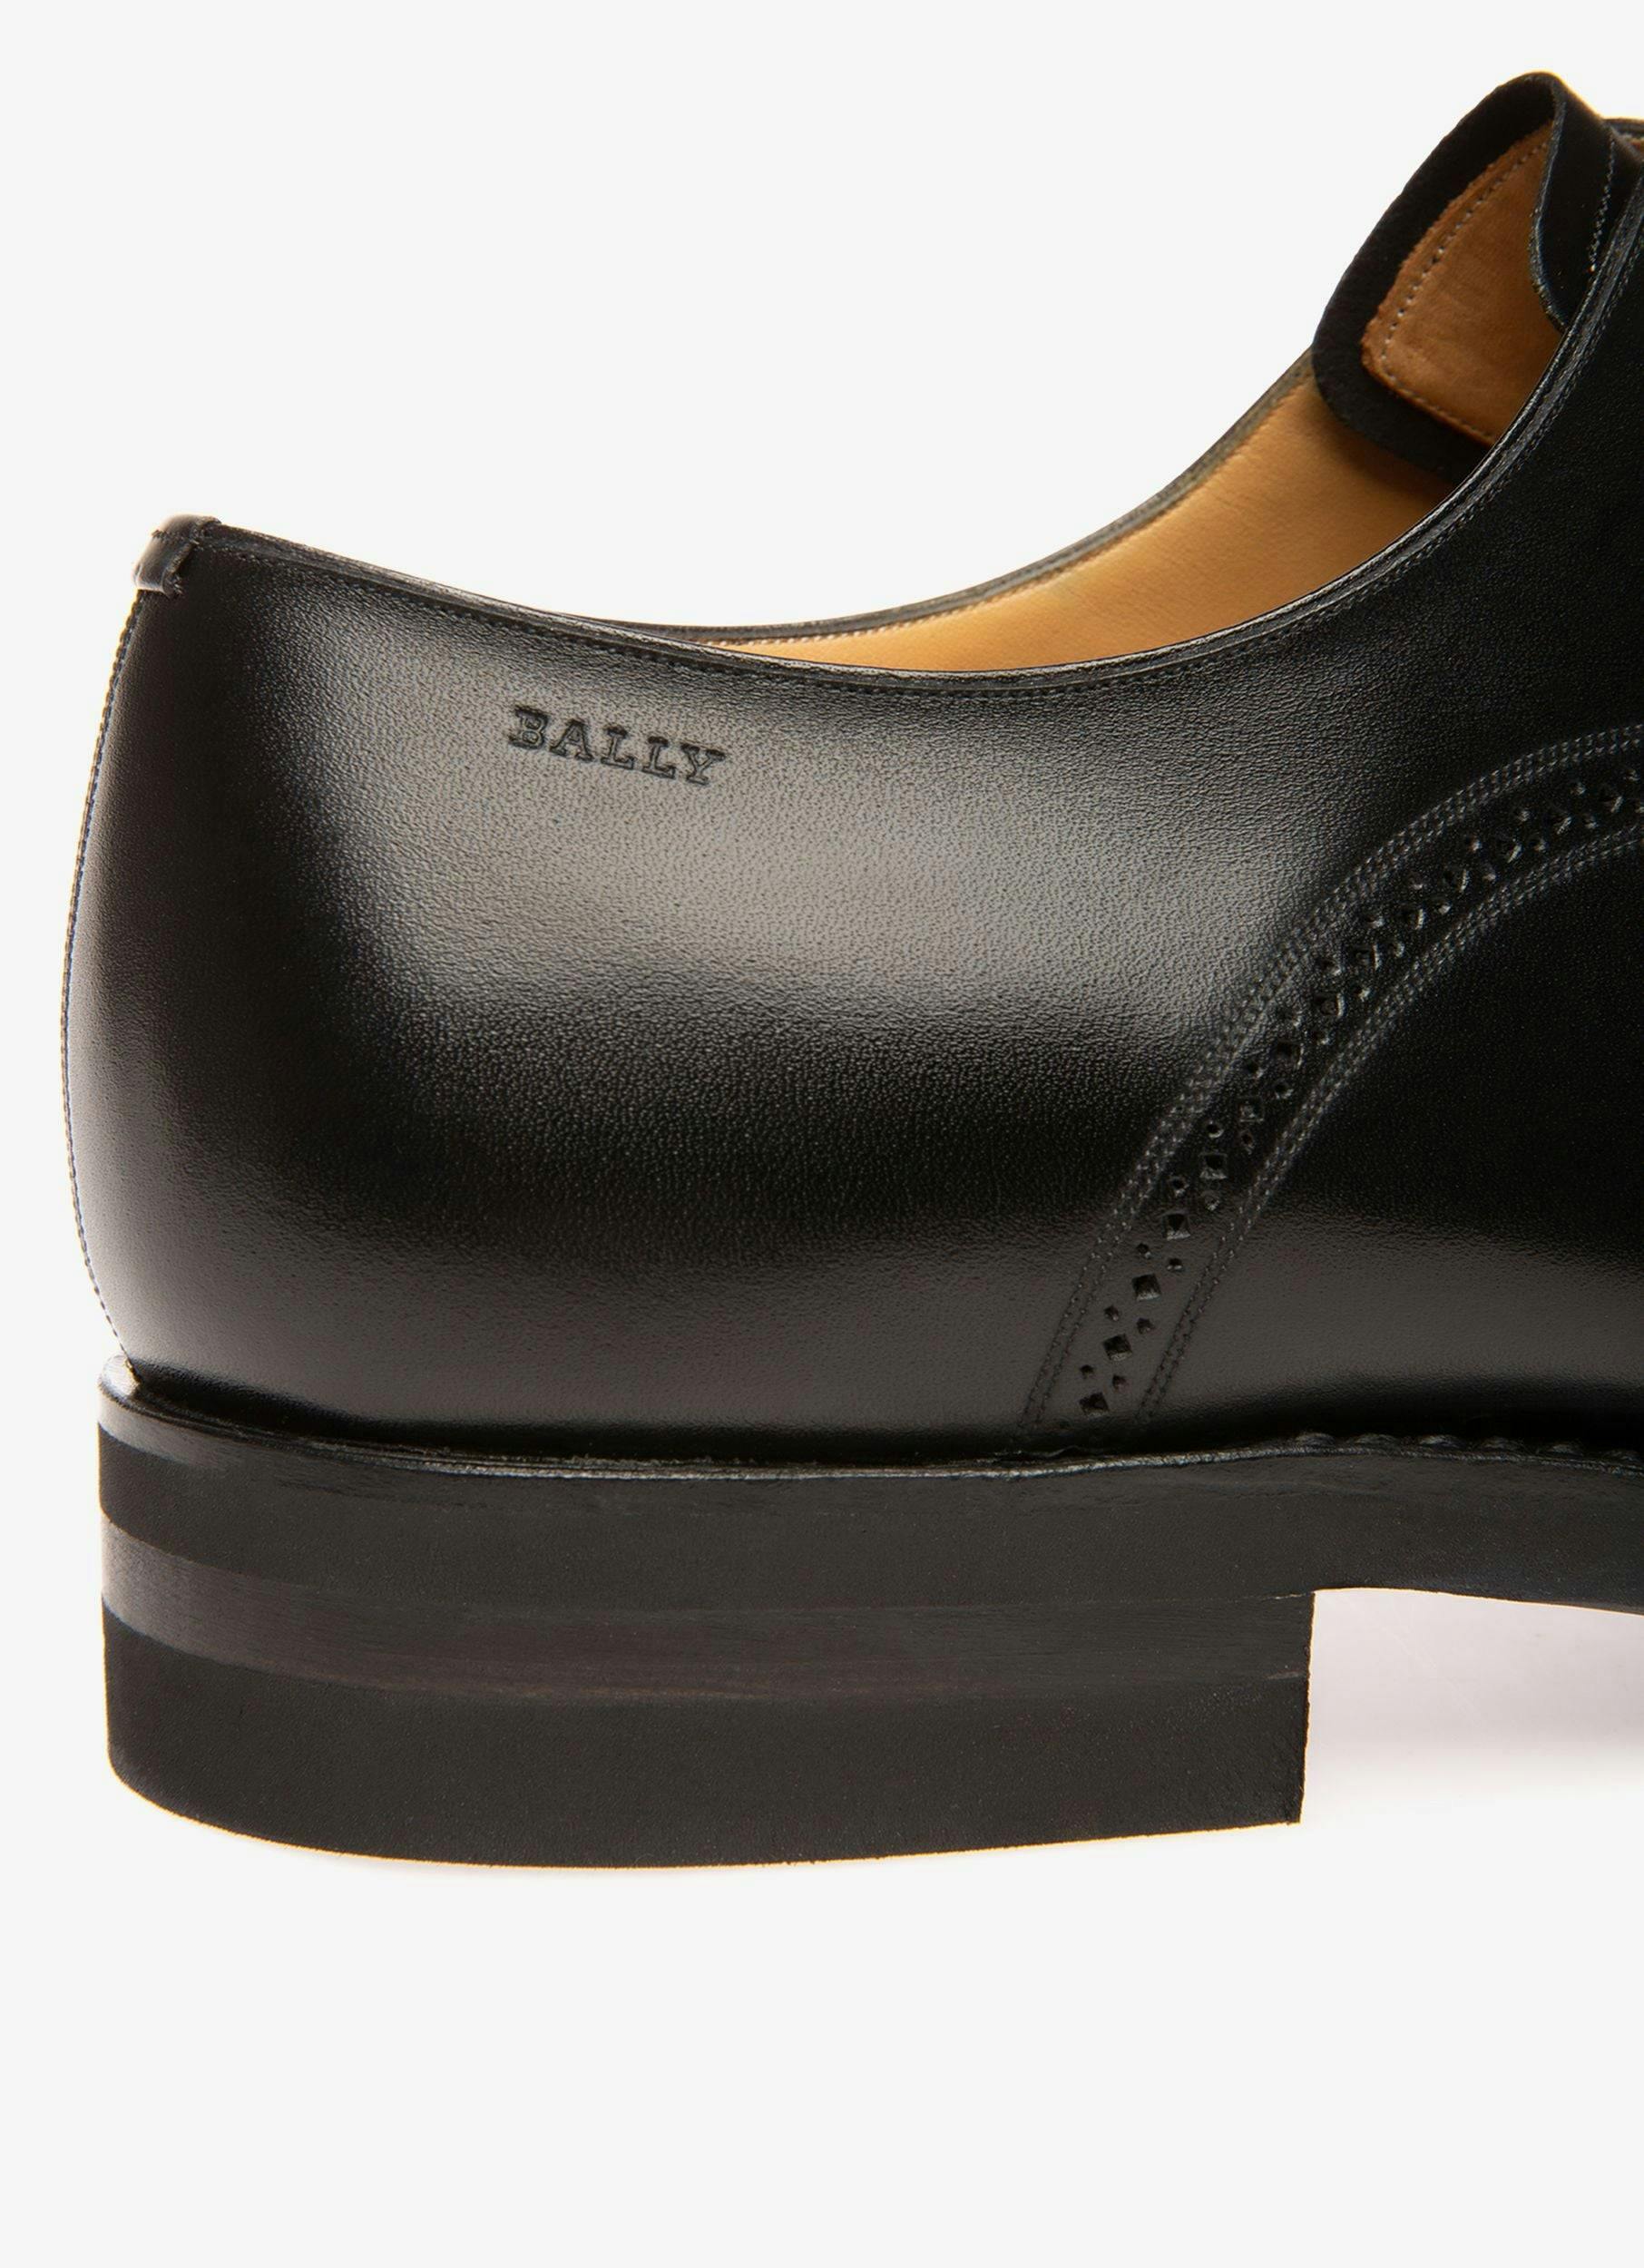 Men's Scribe Novo Oxford Shoes In Black Leather | Bally | Still Life Detail